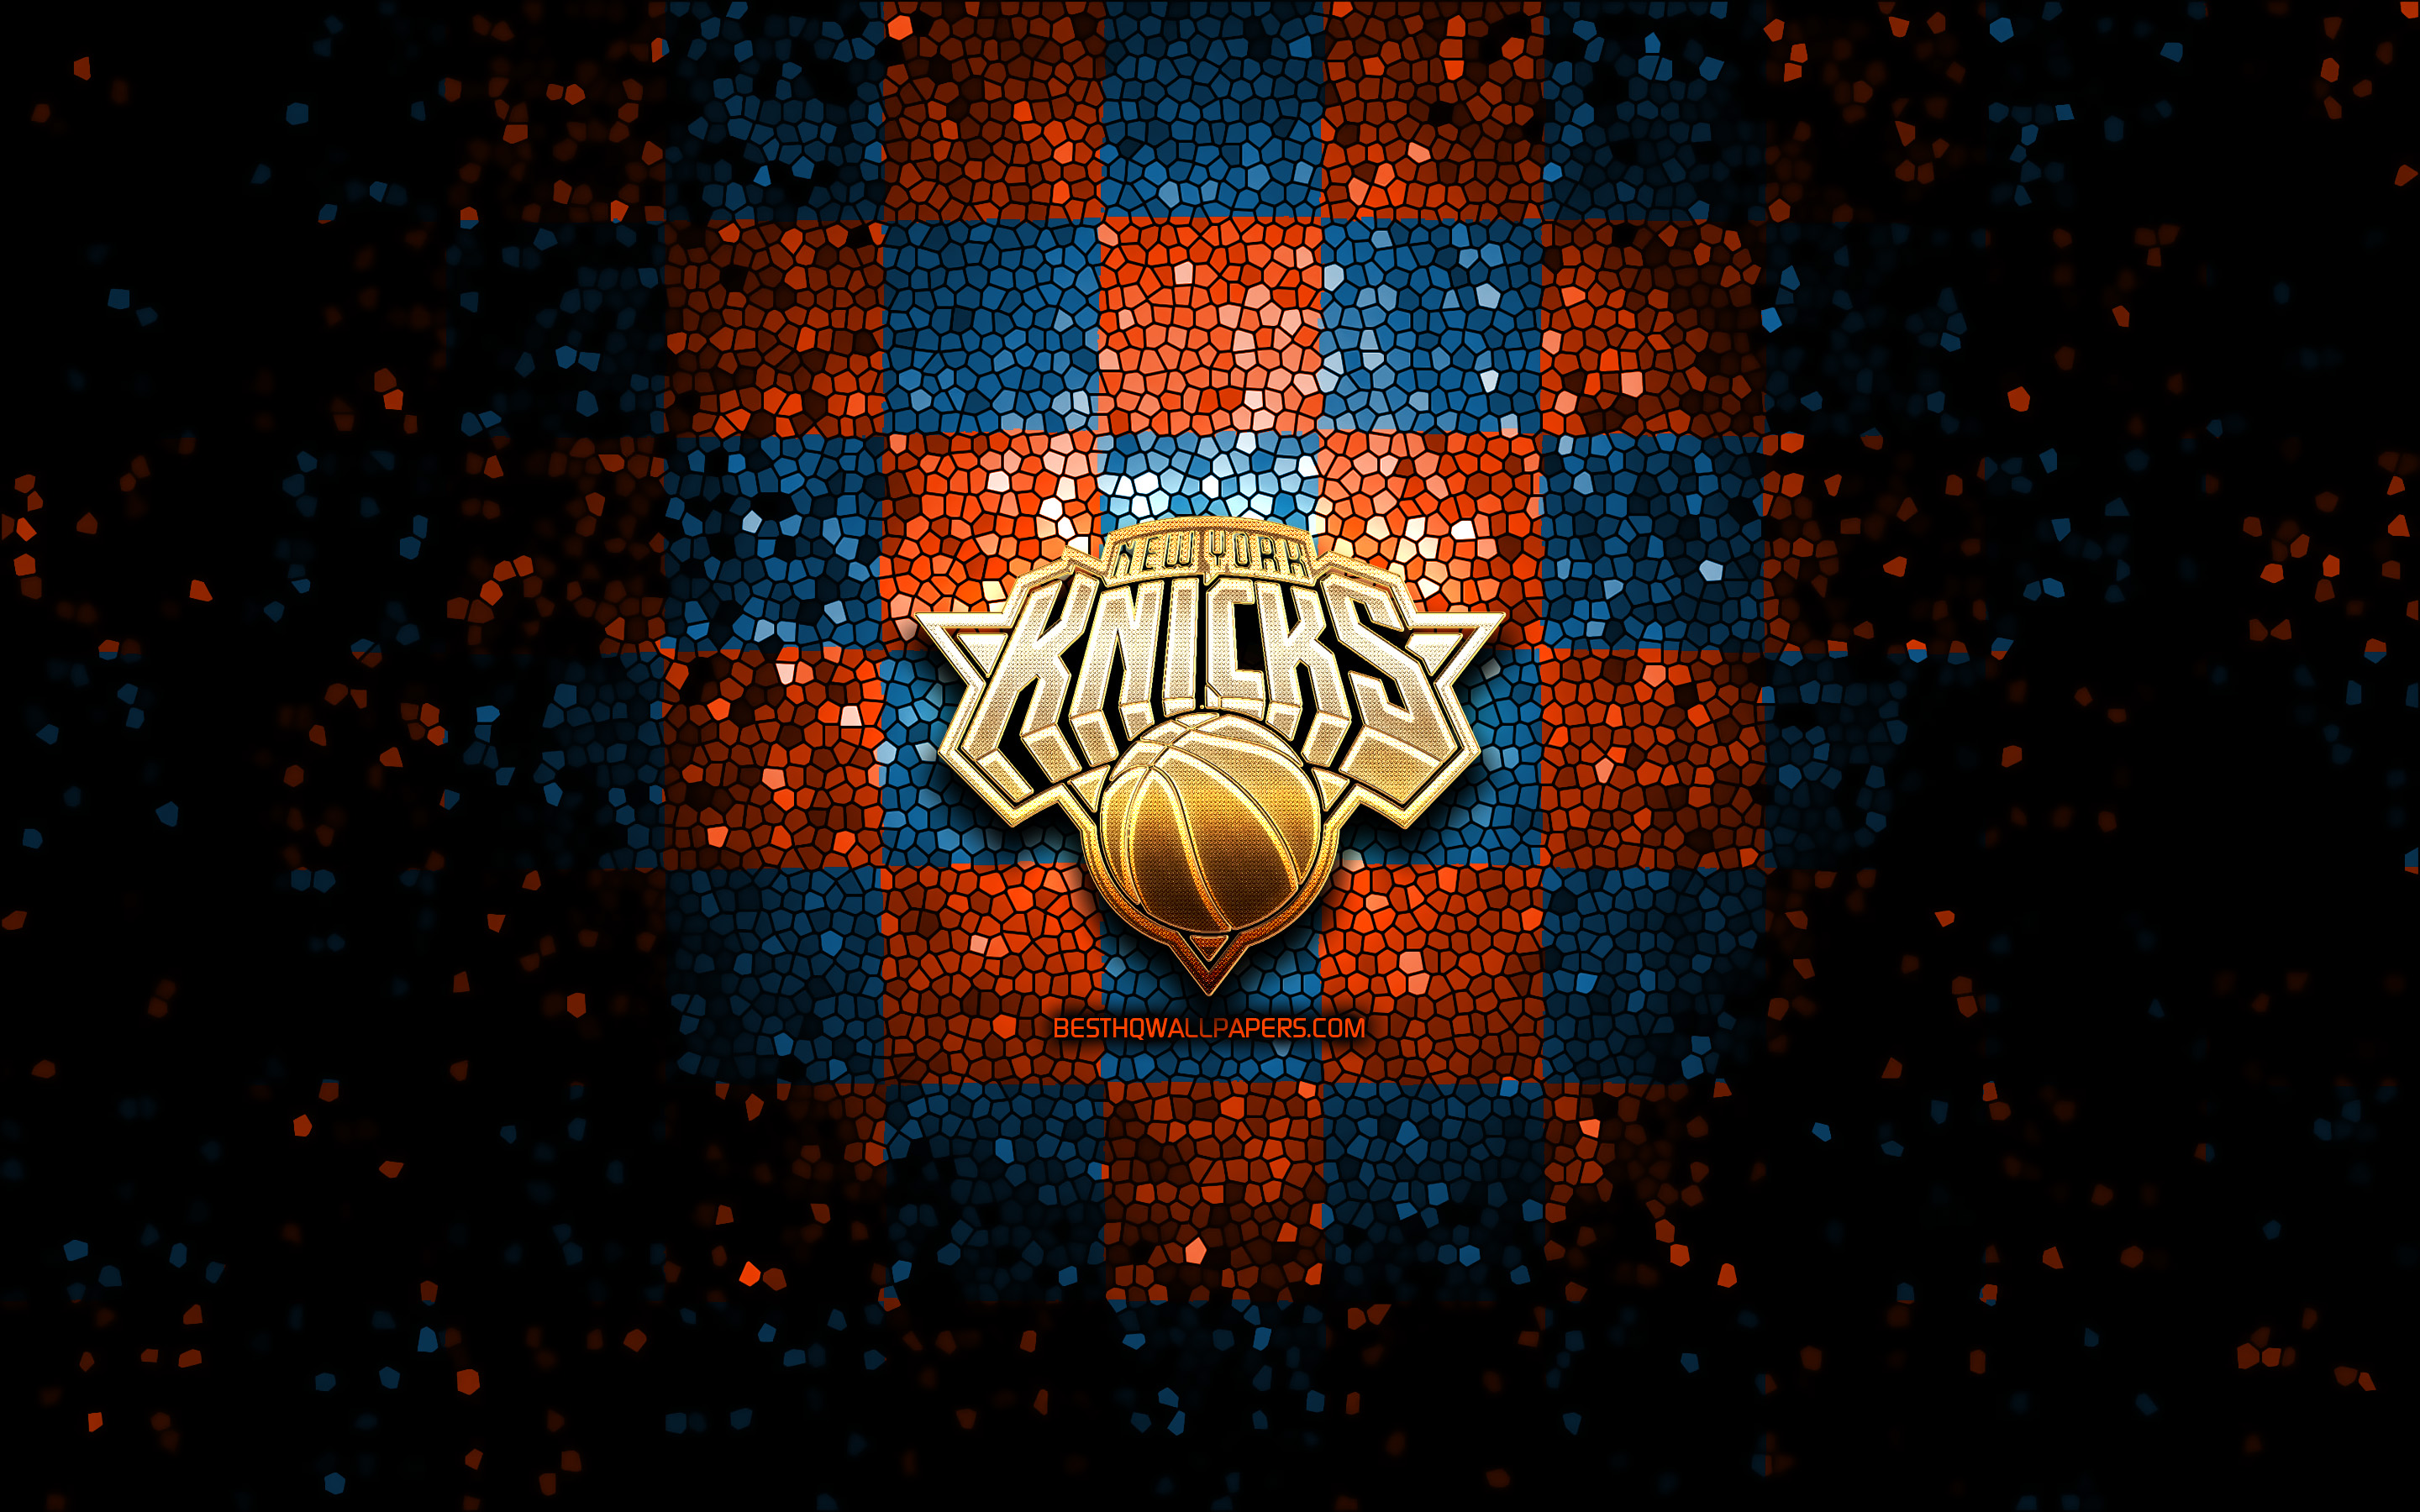 Download wallpapers New York Knicks 4k scorched logo NBA blue wooden  background american basketball team Eastern Conference grunge NY Knicks  basketball New York Knicks logo fire texture USA for desktop with  resolution